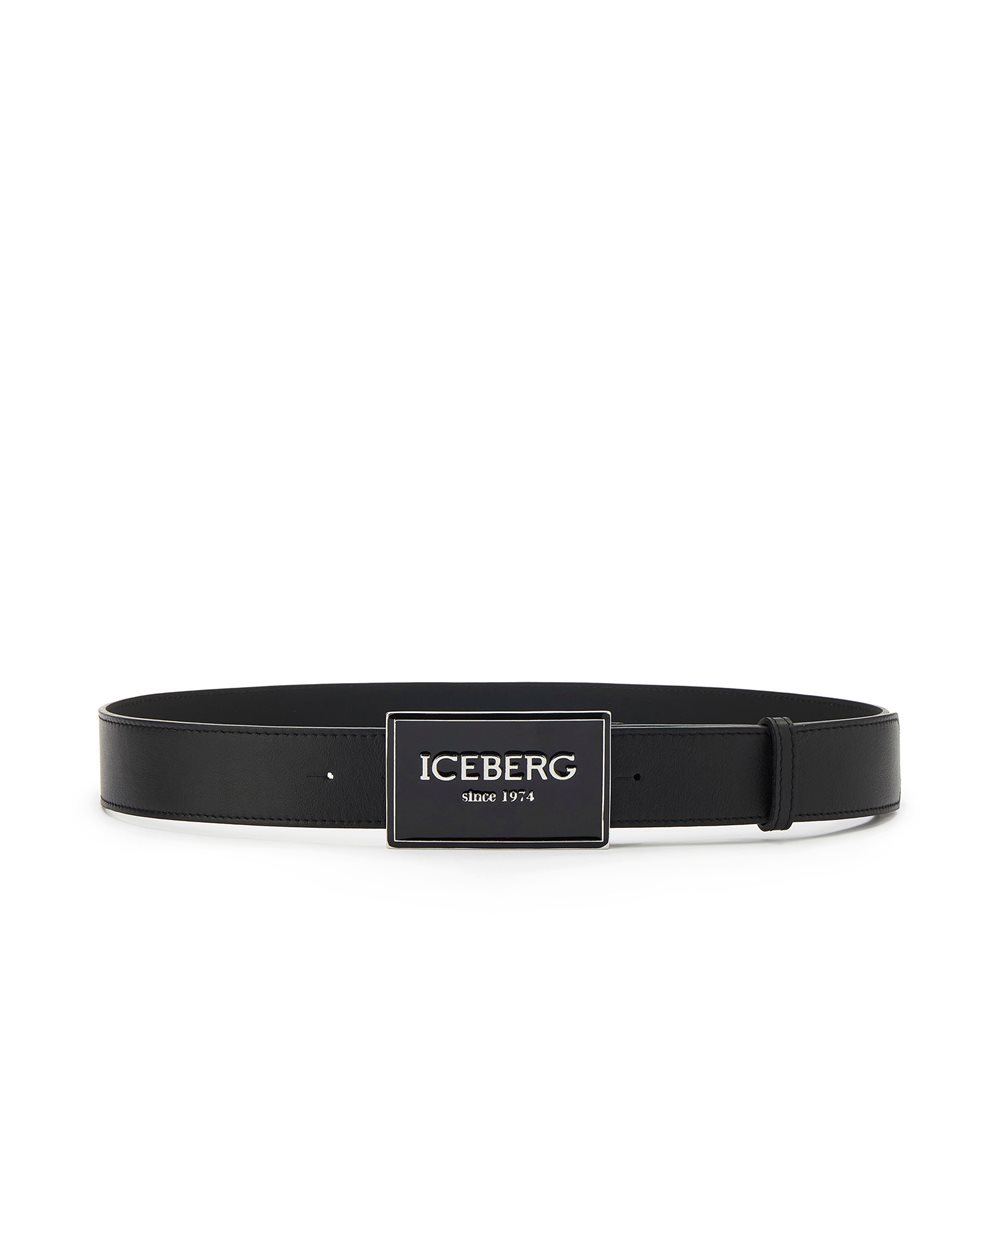 Leather belt with logoed buckle - ( PRIMO STEP IT ) PROMO SALDI UP TO 40% | Iceberg - Official Website